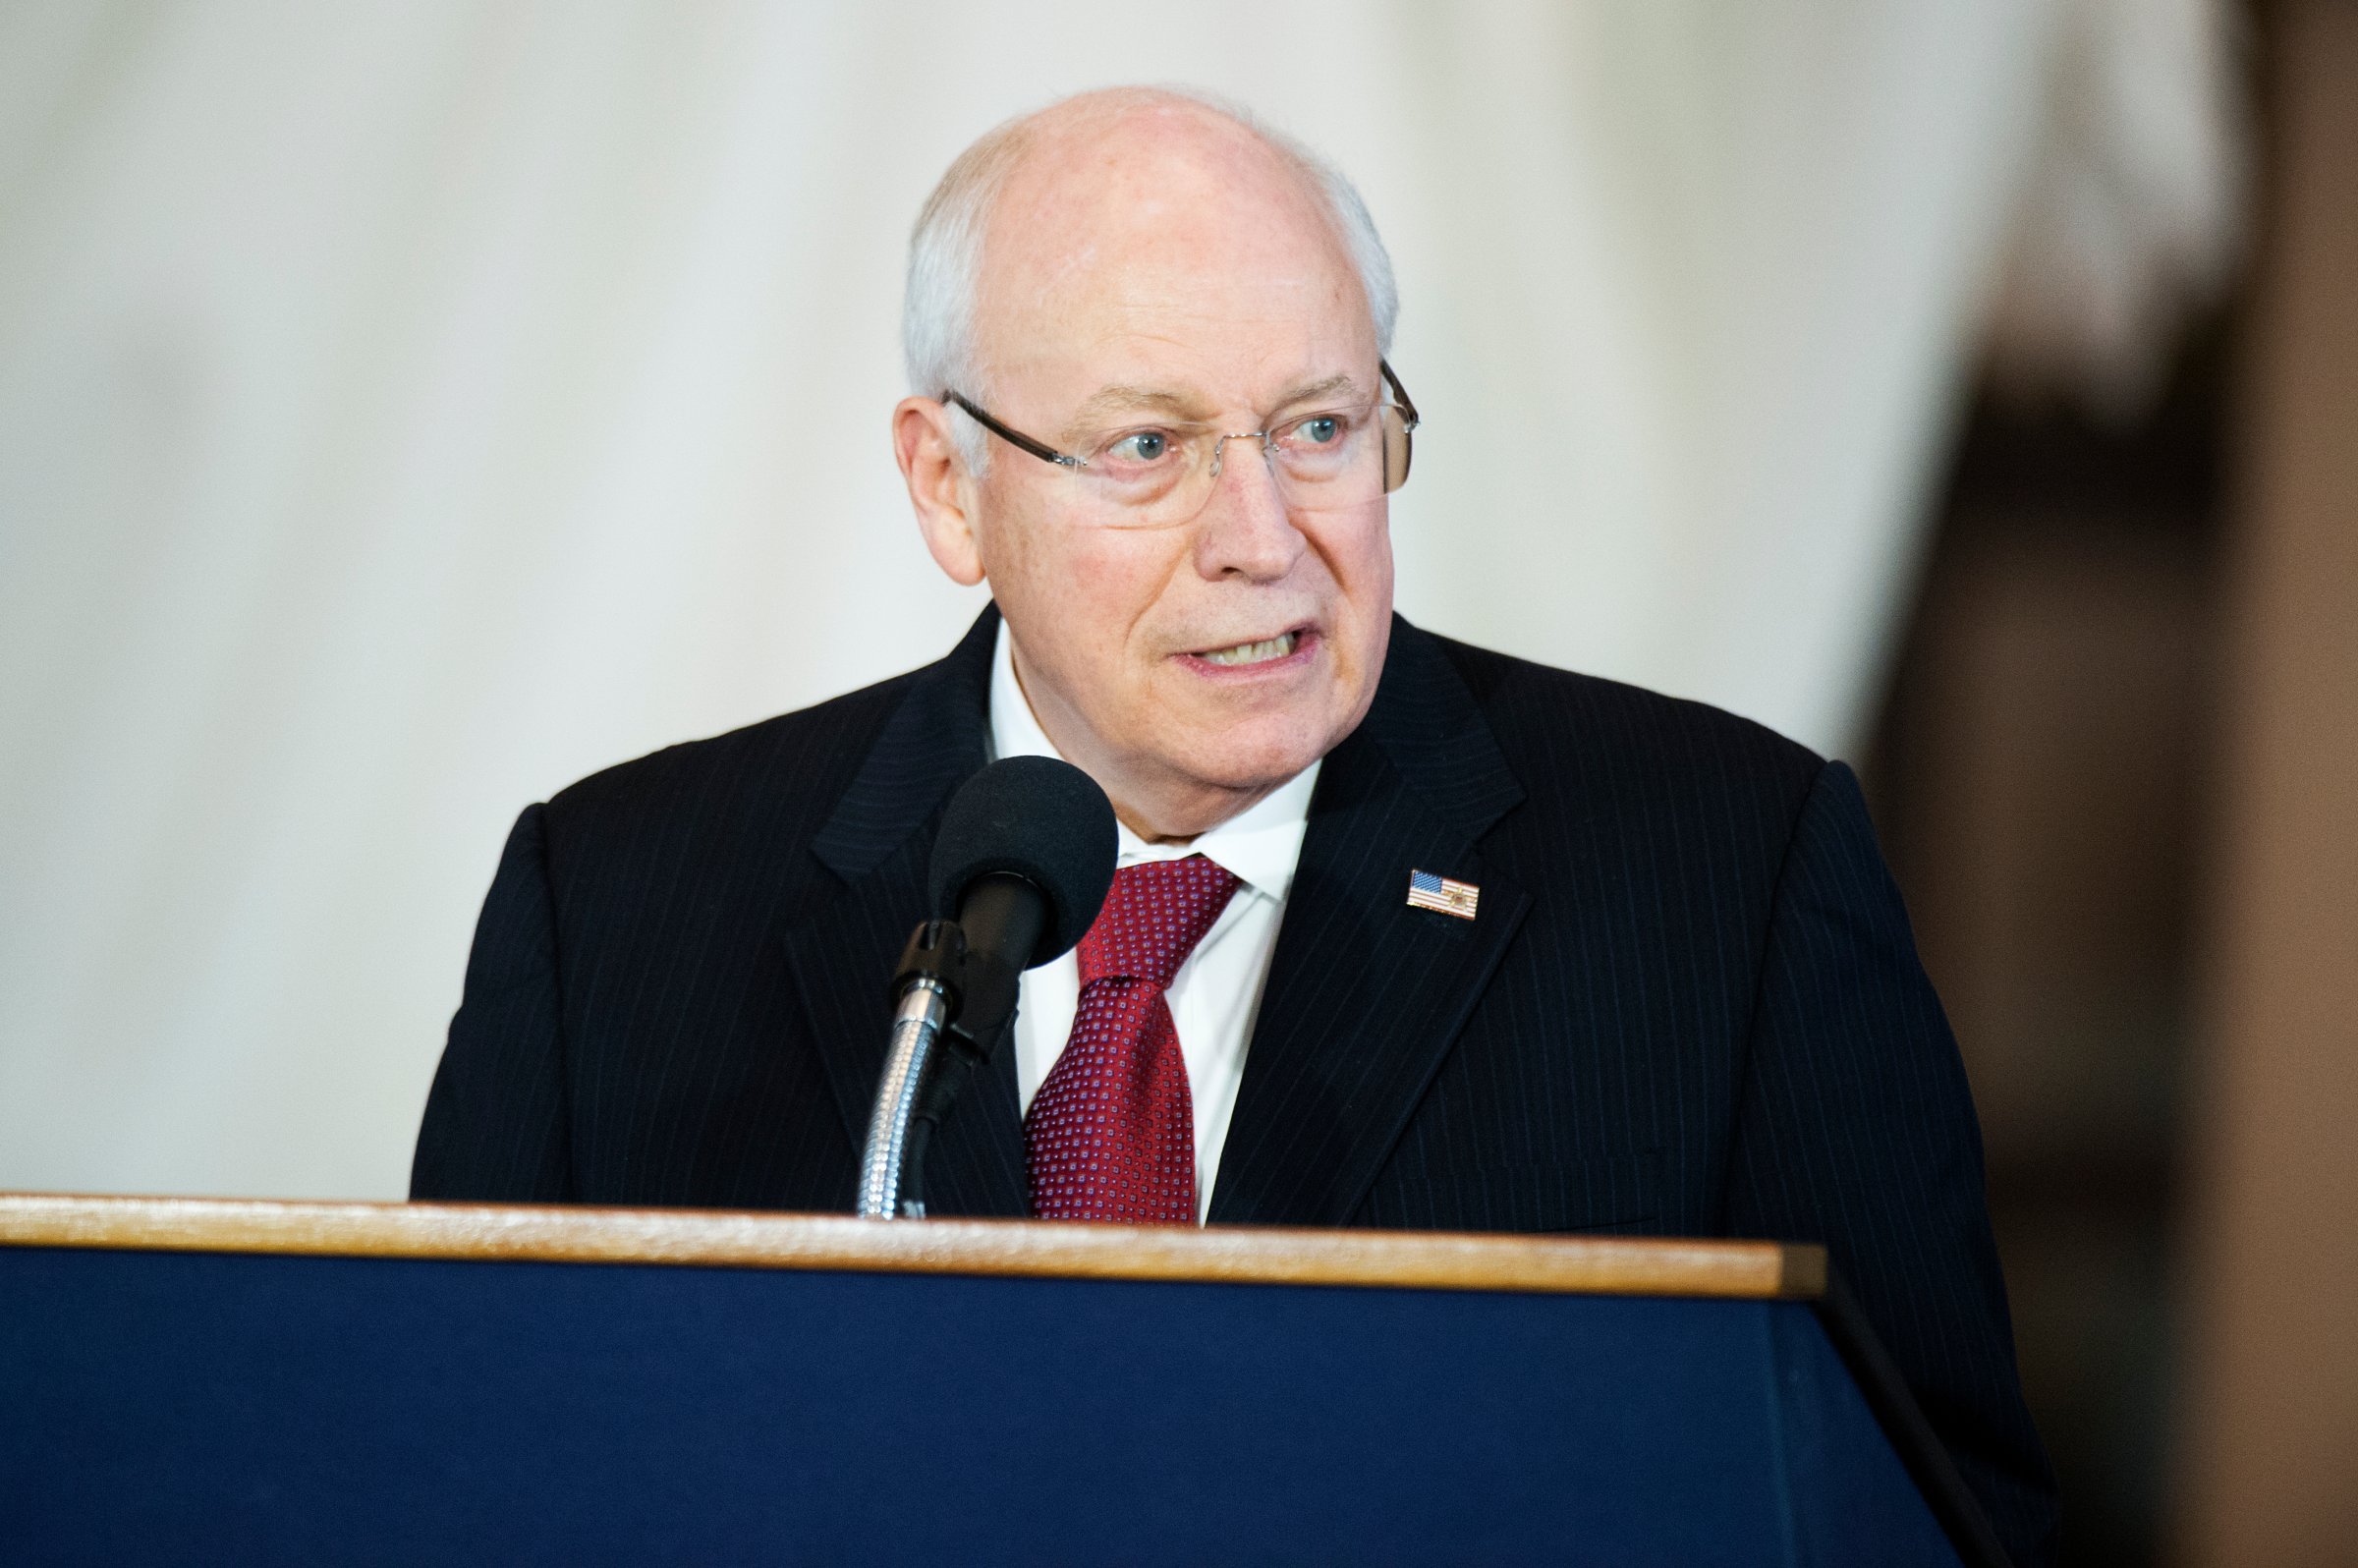 Former Vice President Dick Cheney makes remarks during a bust unveiling ceremony for him in the Capitol Visitor Center's Emancipation Hall on Dec. 3, 2015.